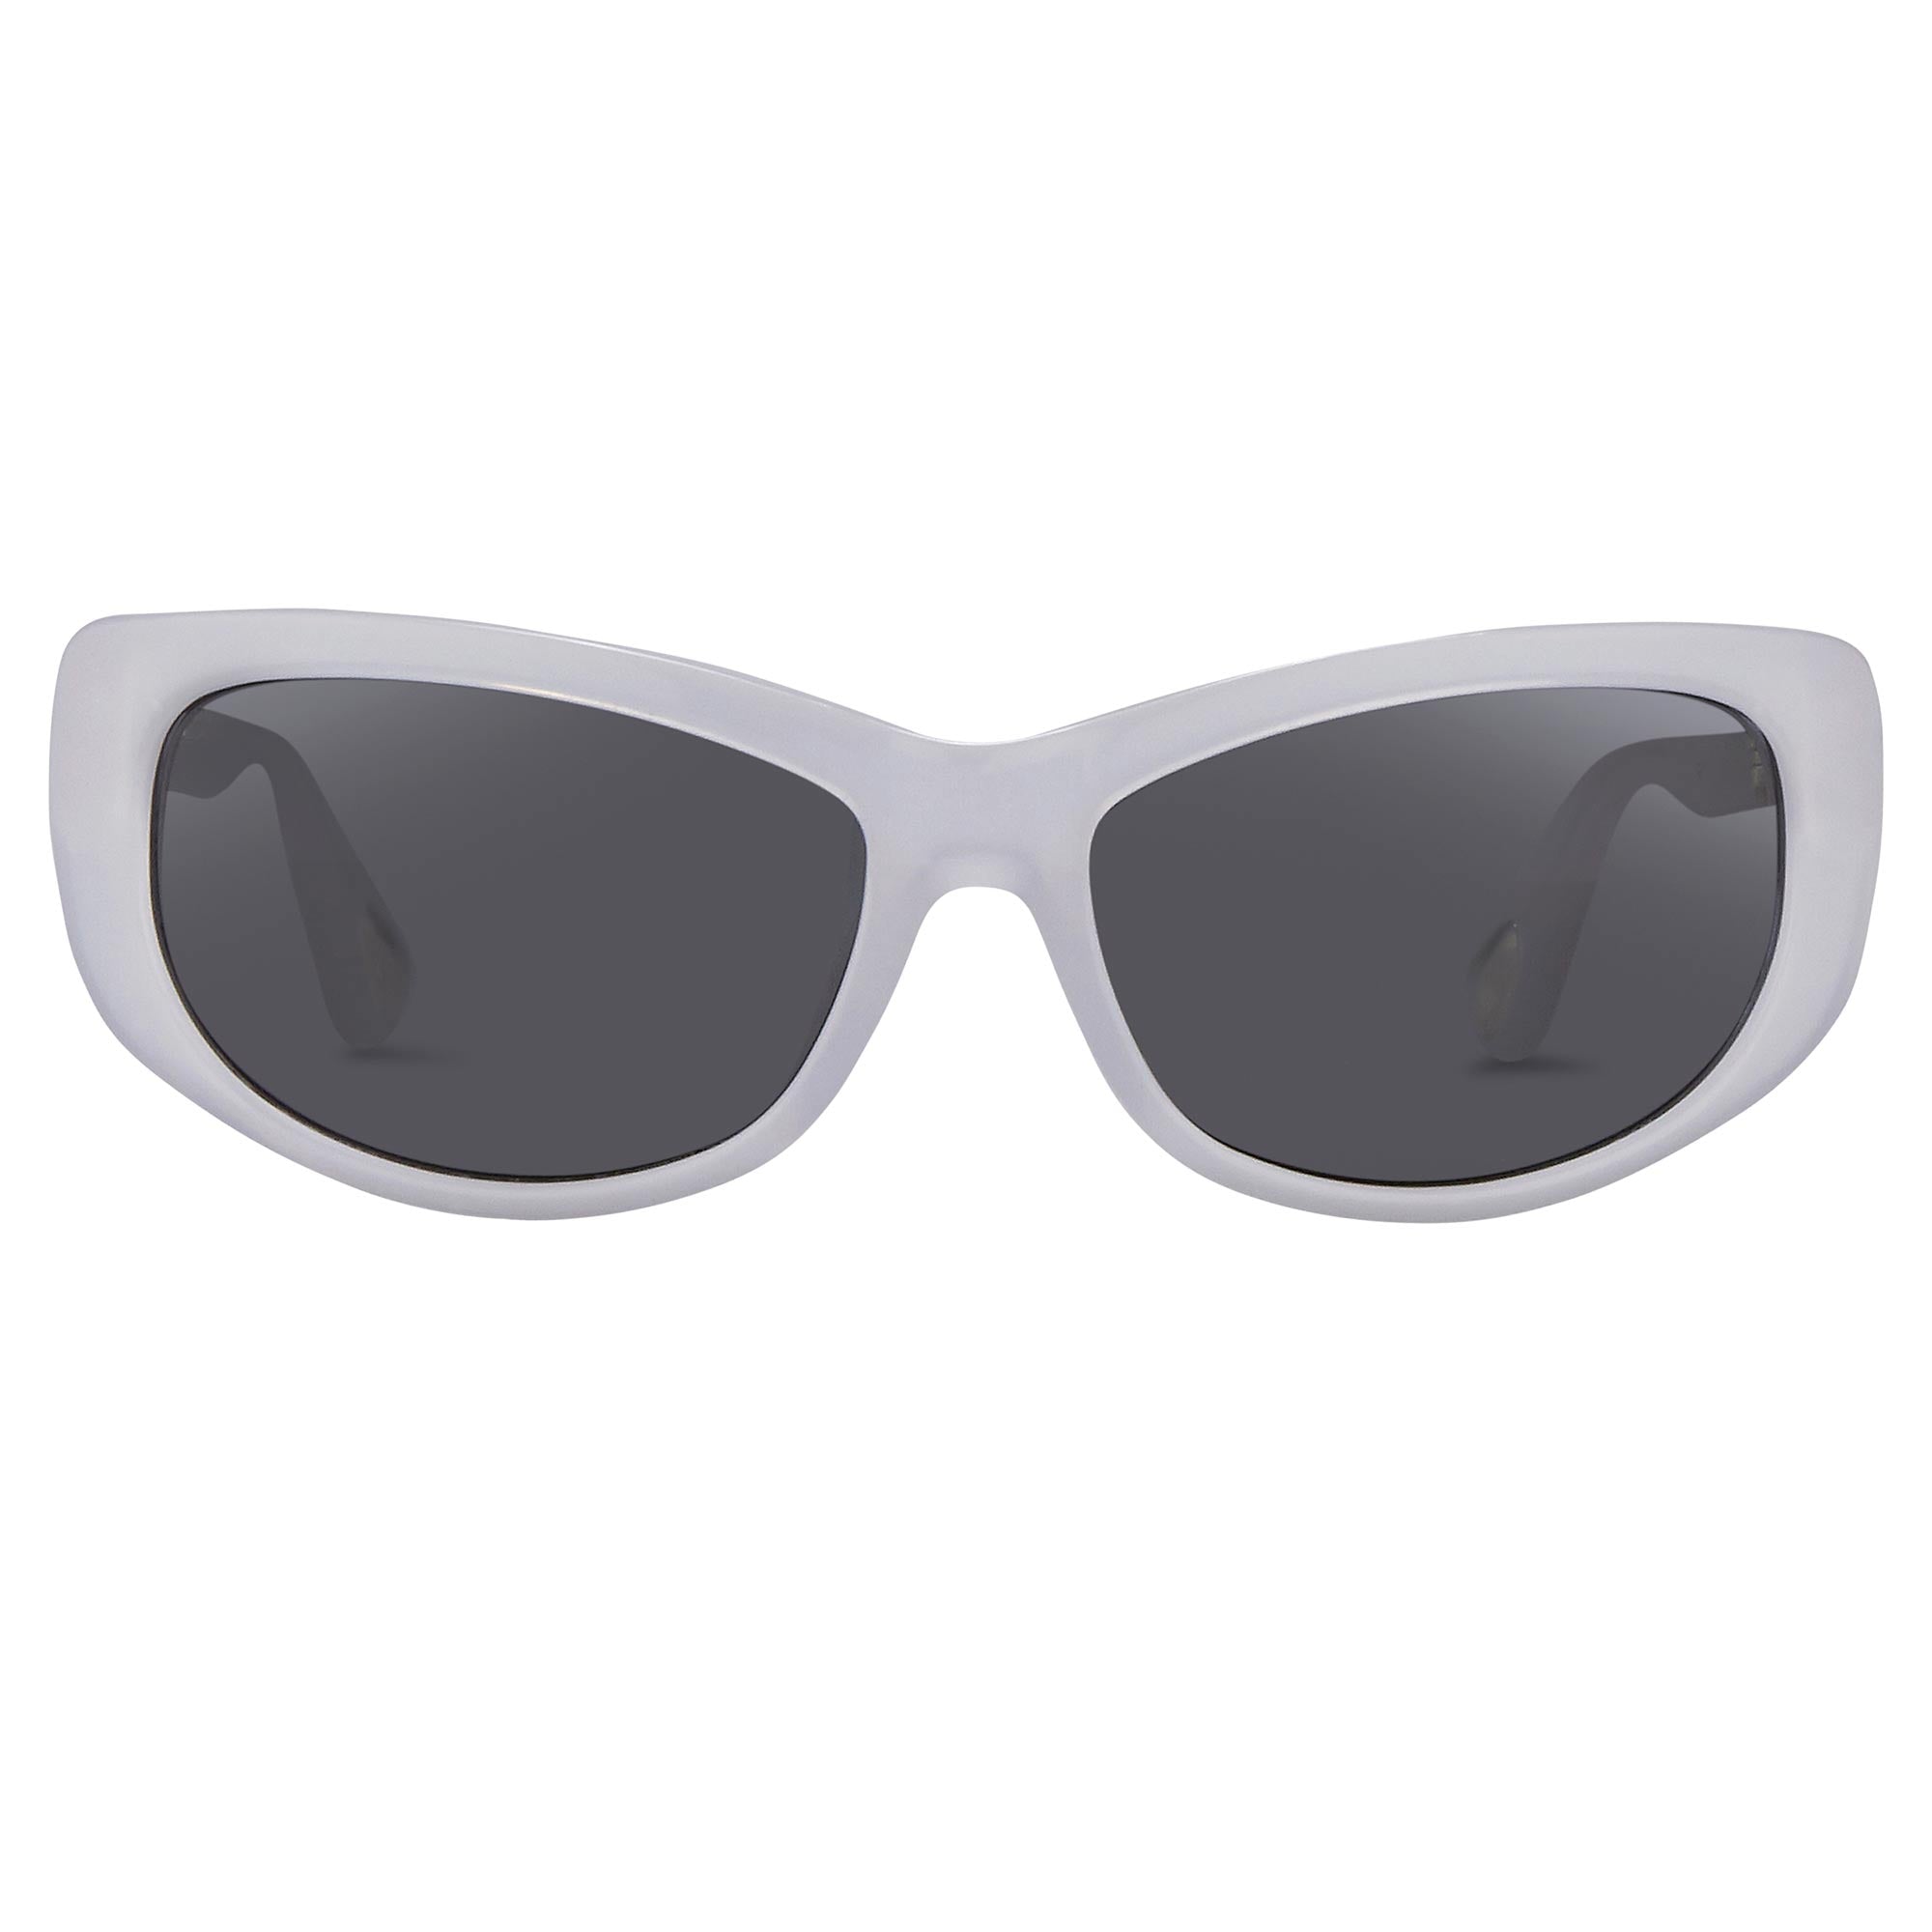 Ann Demeulemeester Sunglasses Cat Eye White 925 Silver with Grey Lenses AD29C4SUN - Watches & Crystals